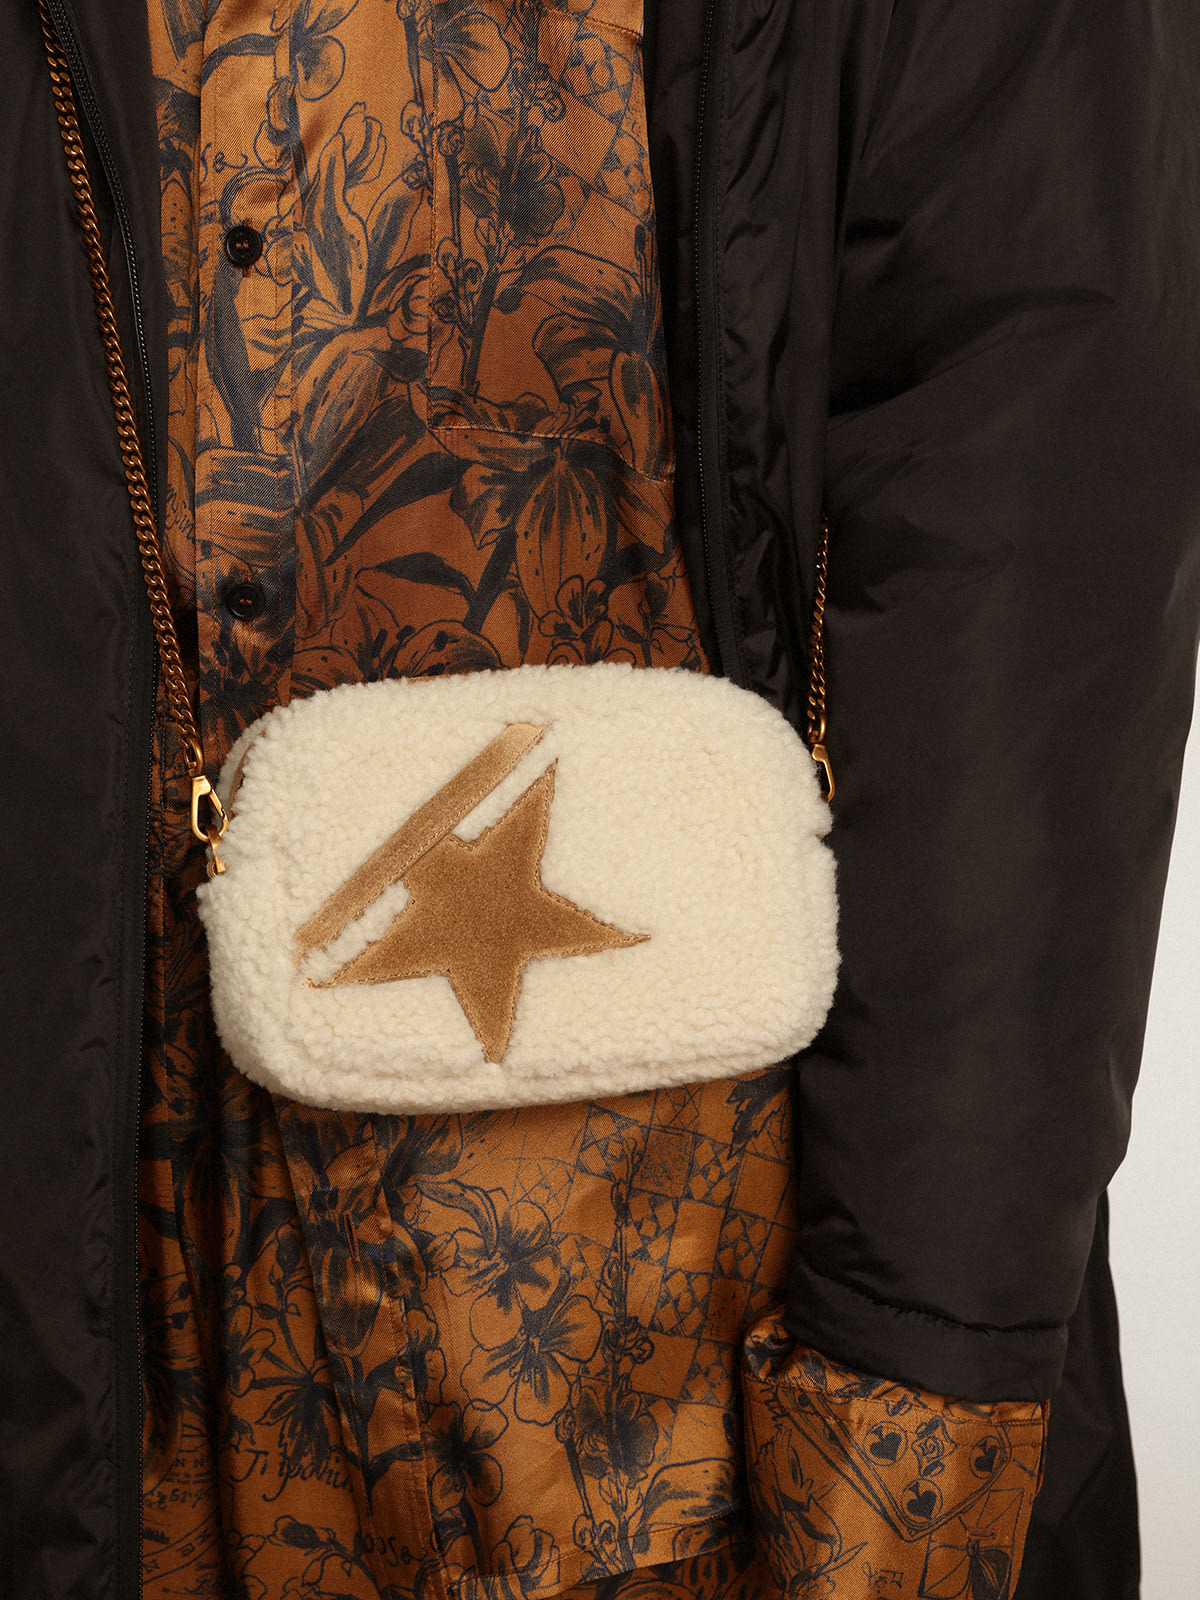 Golden Goose - Mini Star Bag in beige shearling with suede star in 